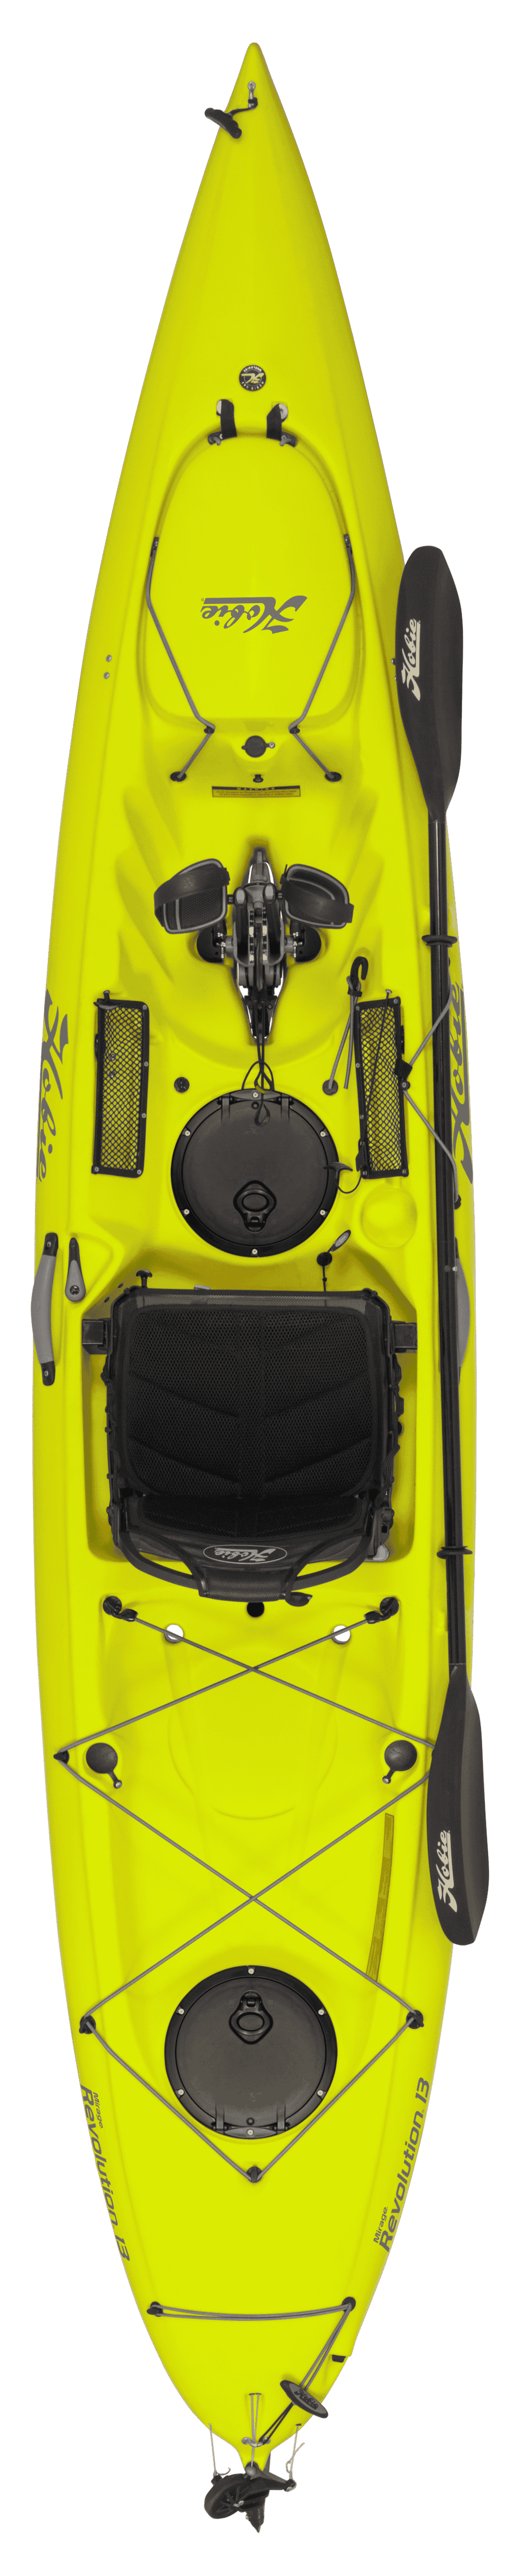 Hobie Revolution 13 pedal kayak top down view showing deck and cockpit features. Colour: Seagrass